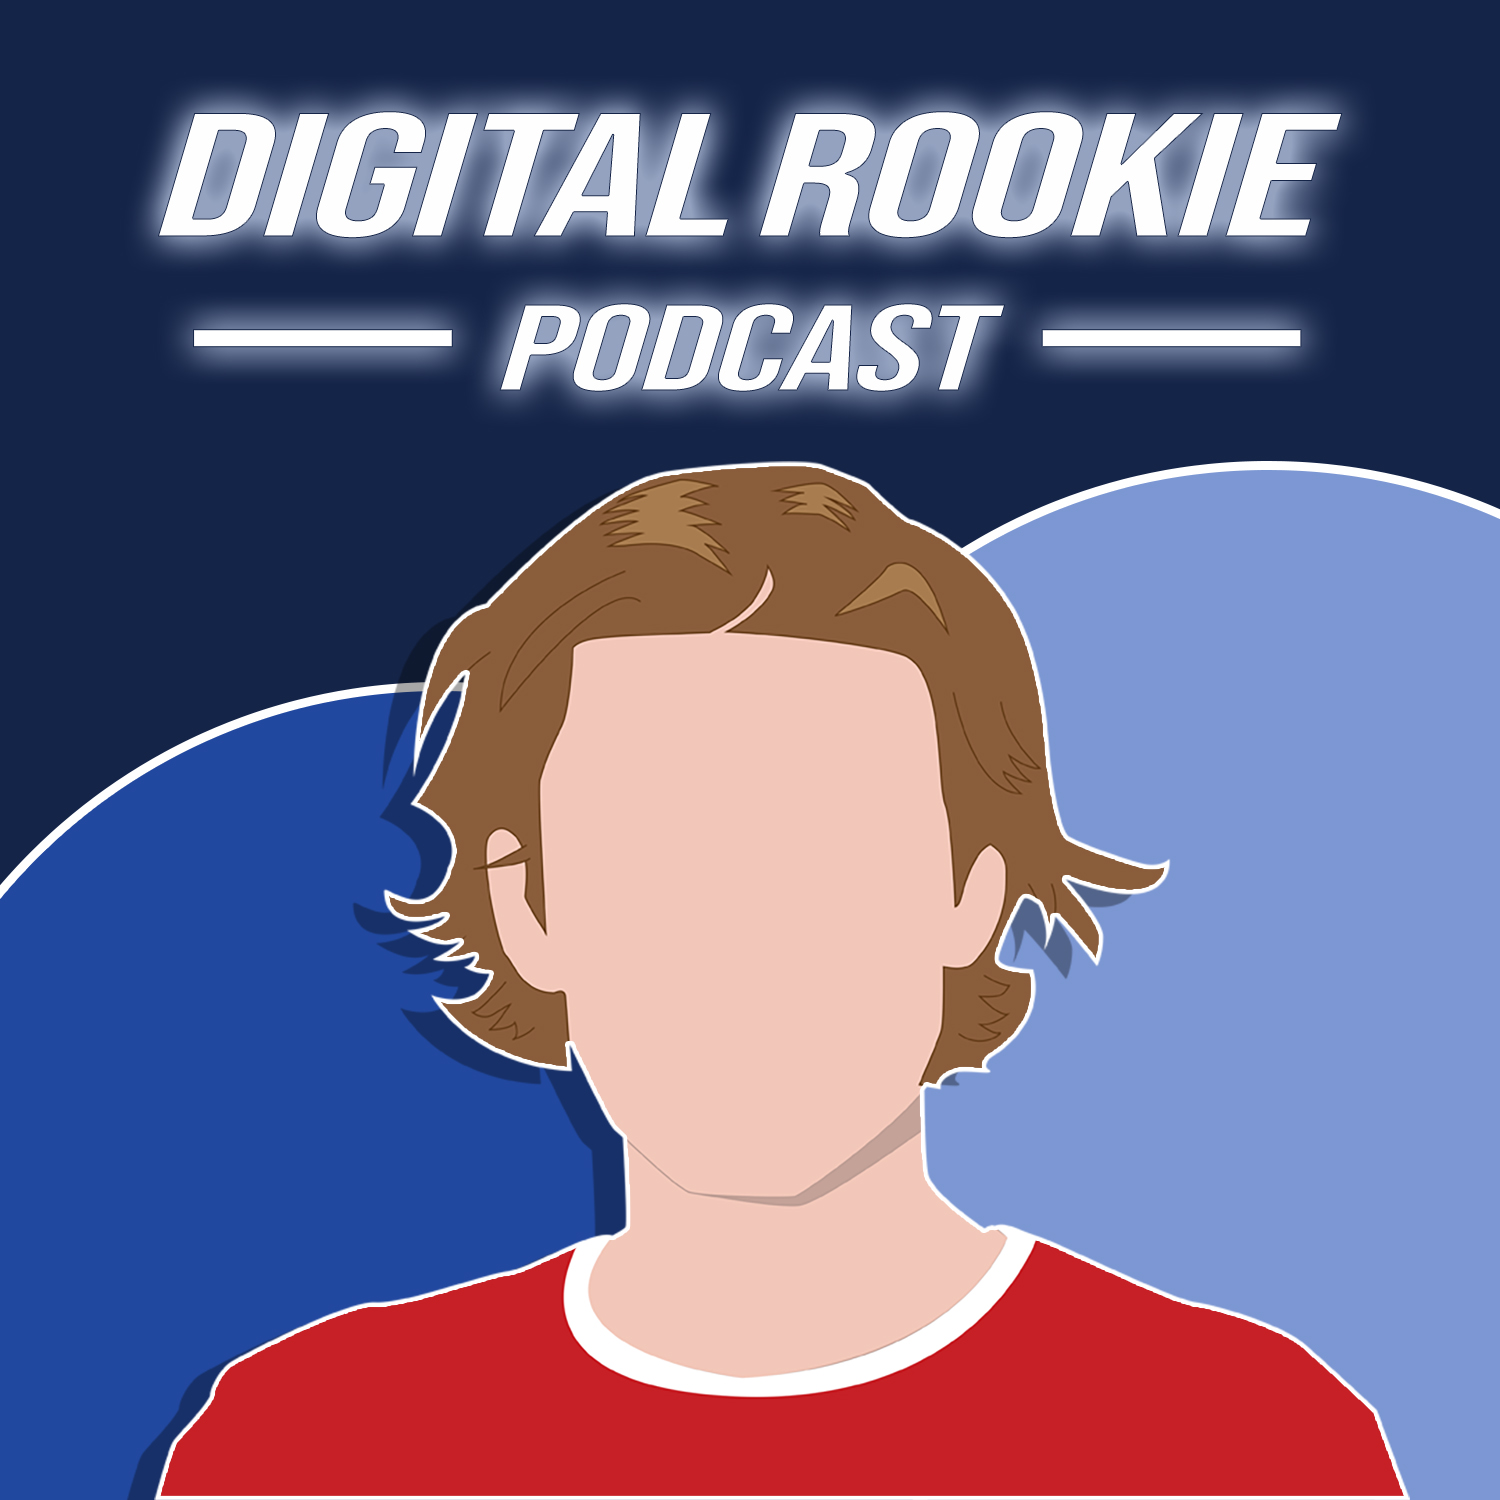 The Digital Rookie Podcast